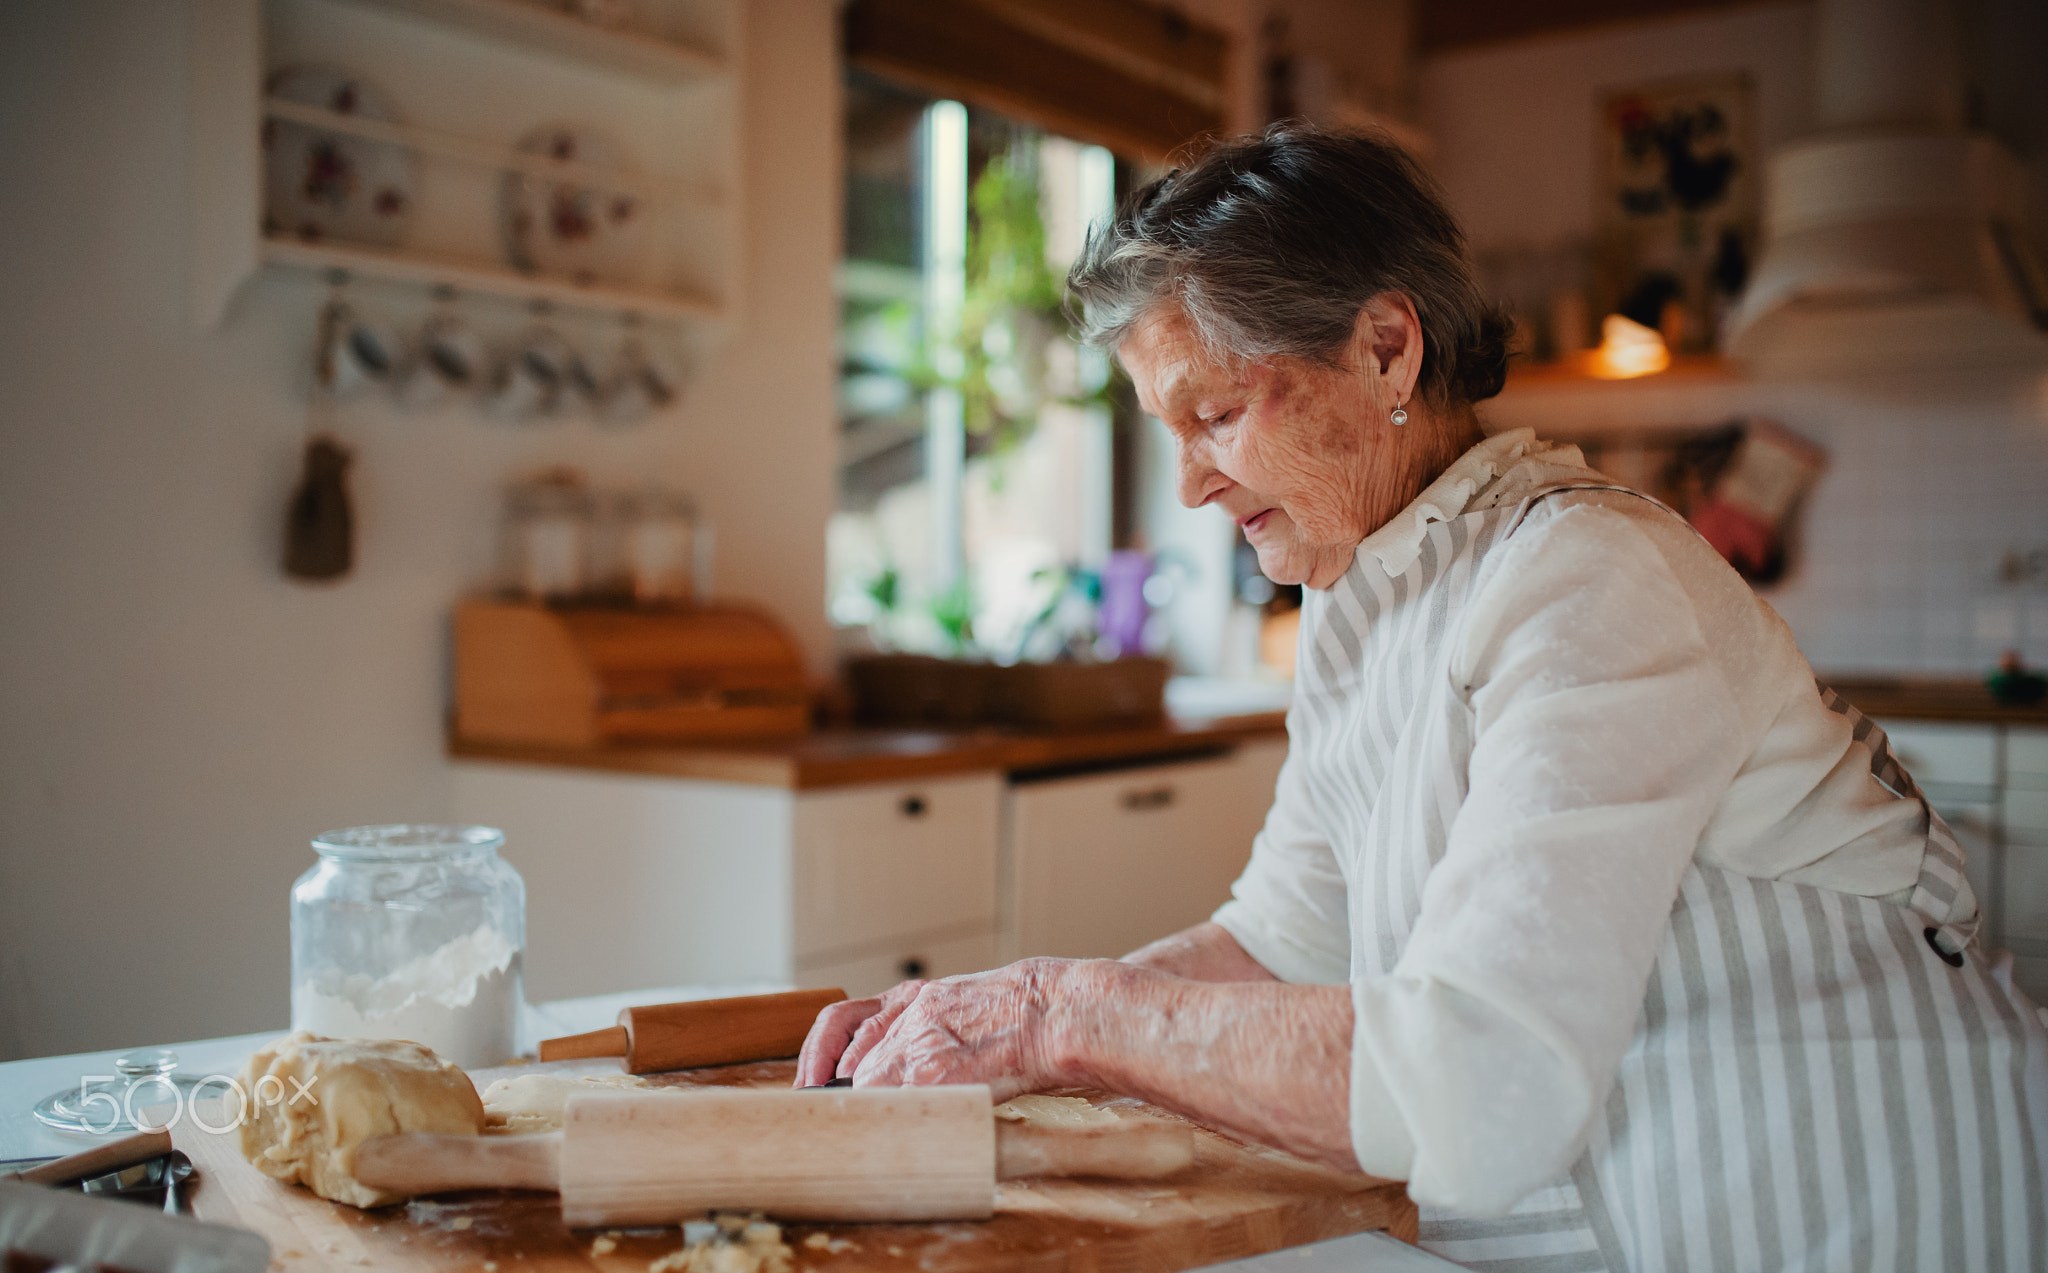 Elderly woman making cakes in a kitchen at home. Copy space.